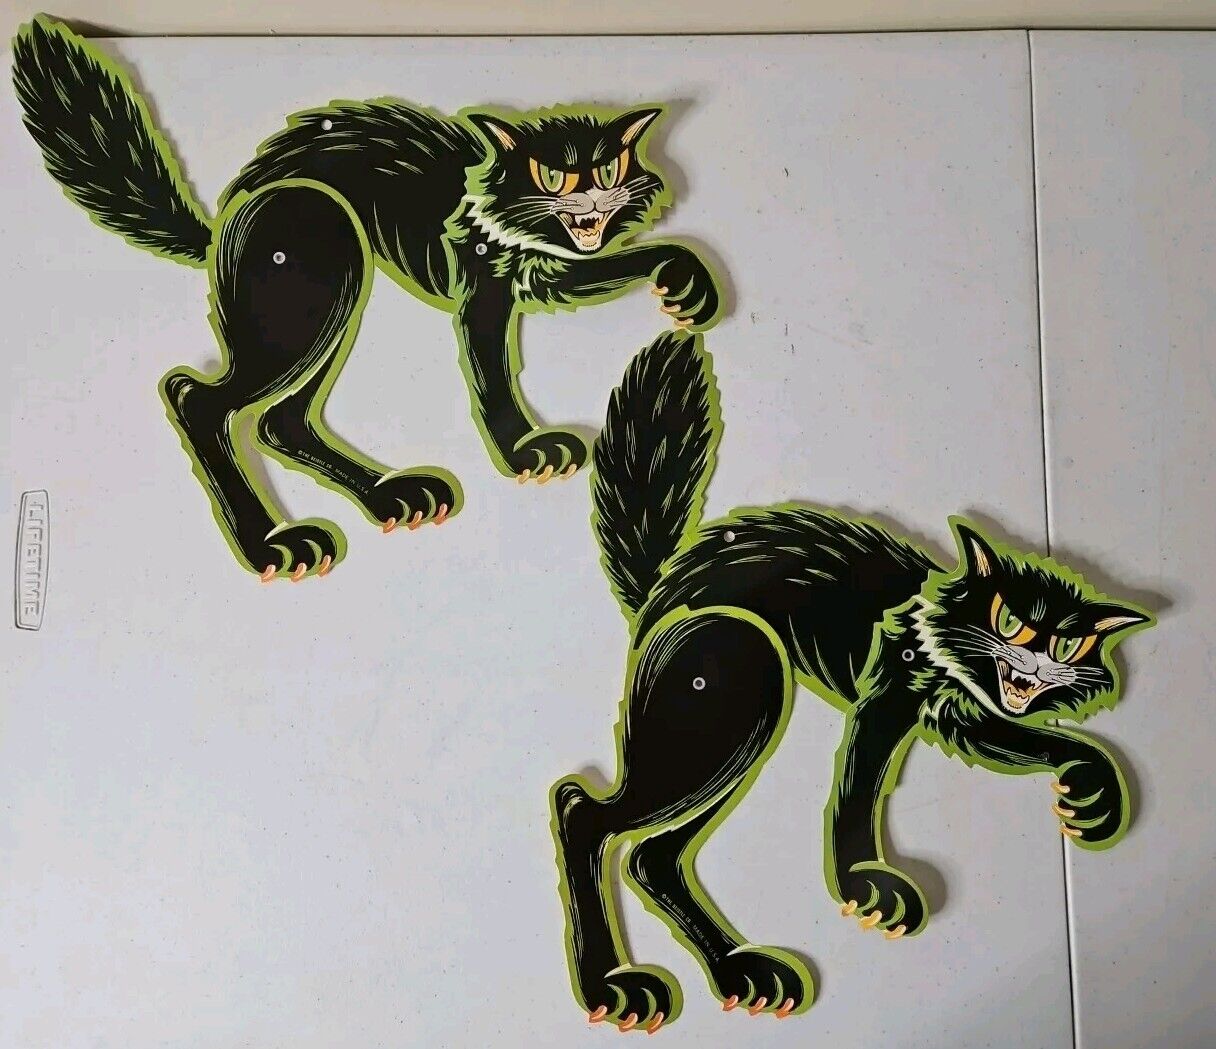 Vtg Halloween 1970s BEISTLE Co Black Cat Snarling Arched Back Diecut Articulated